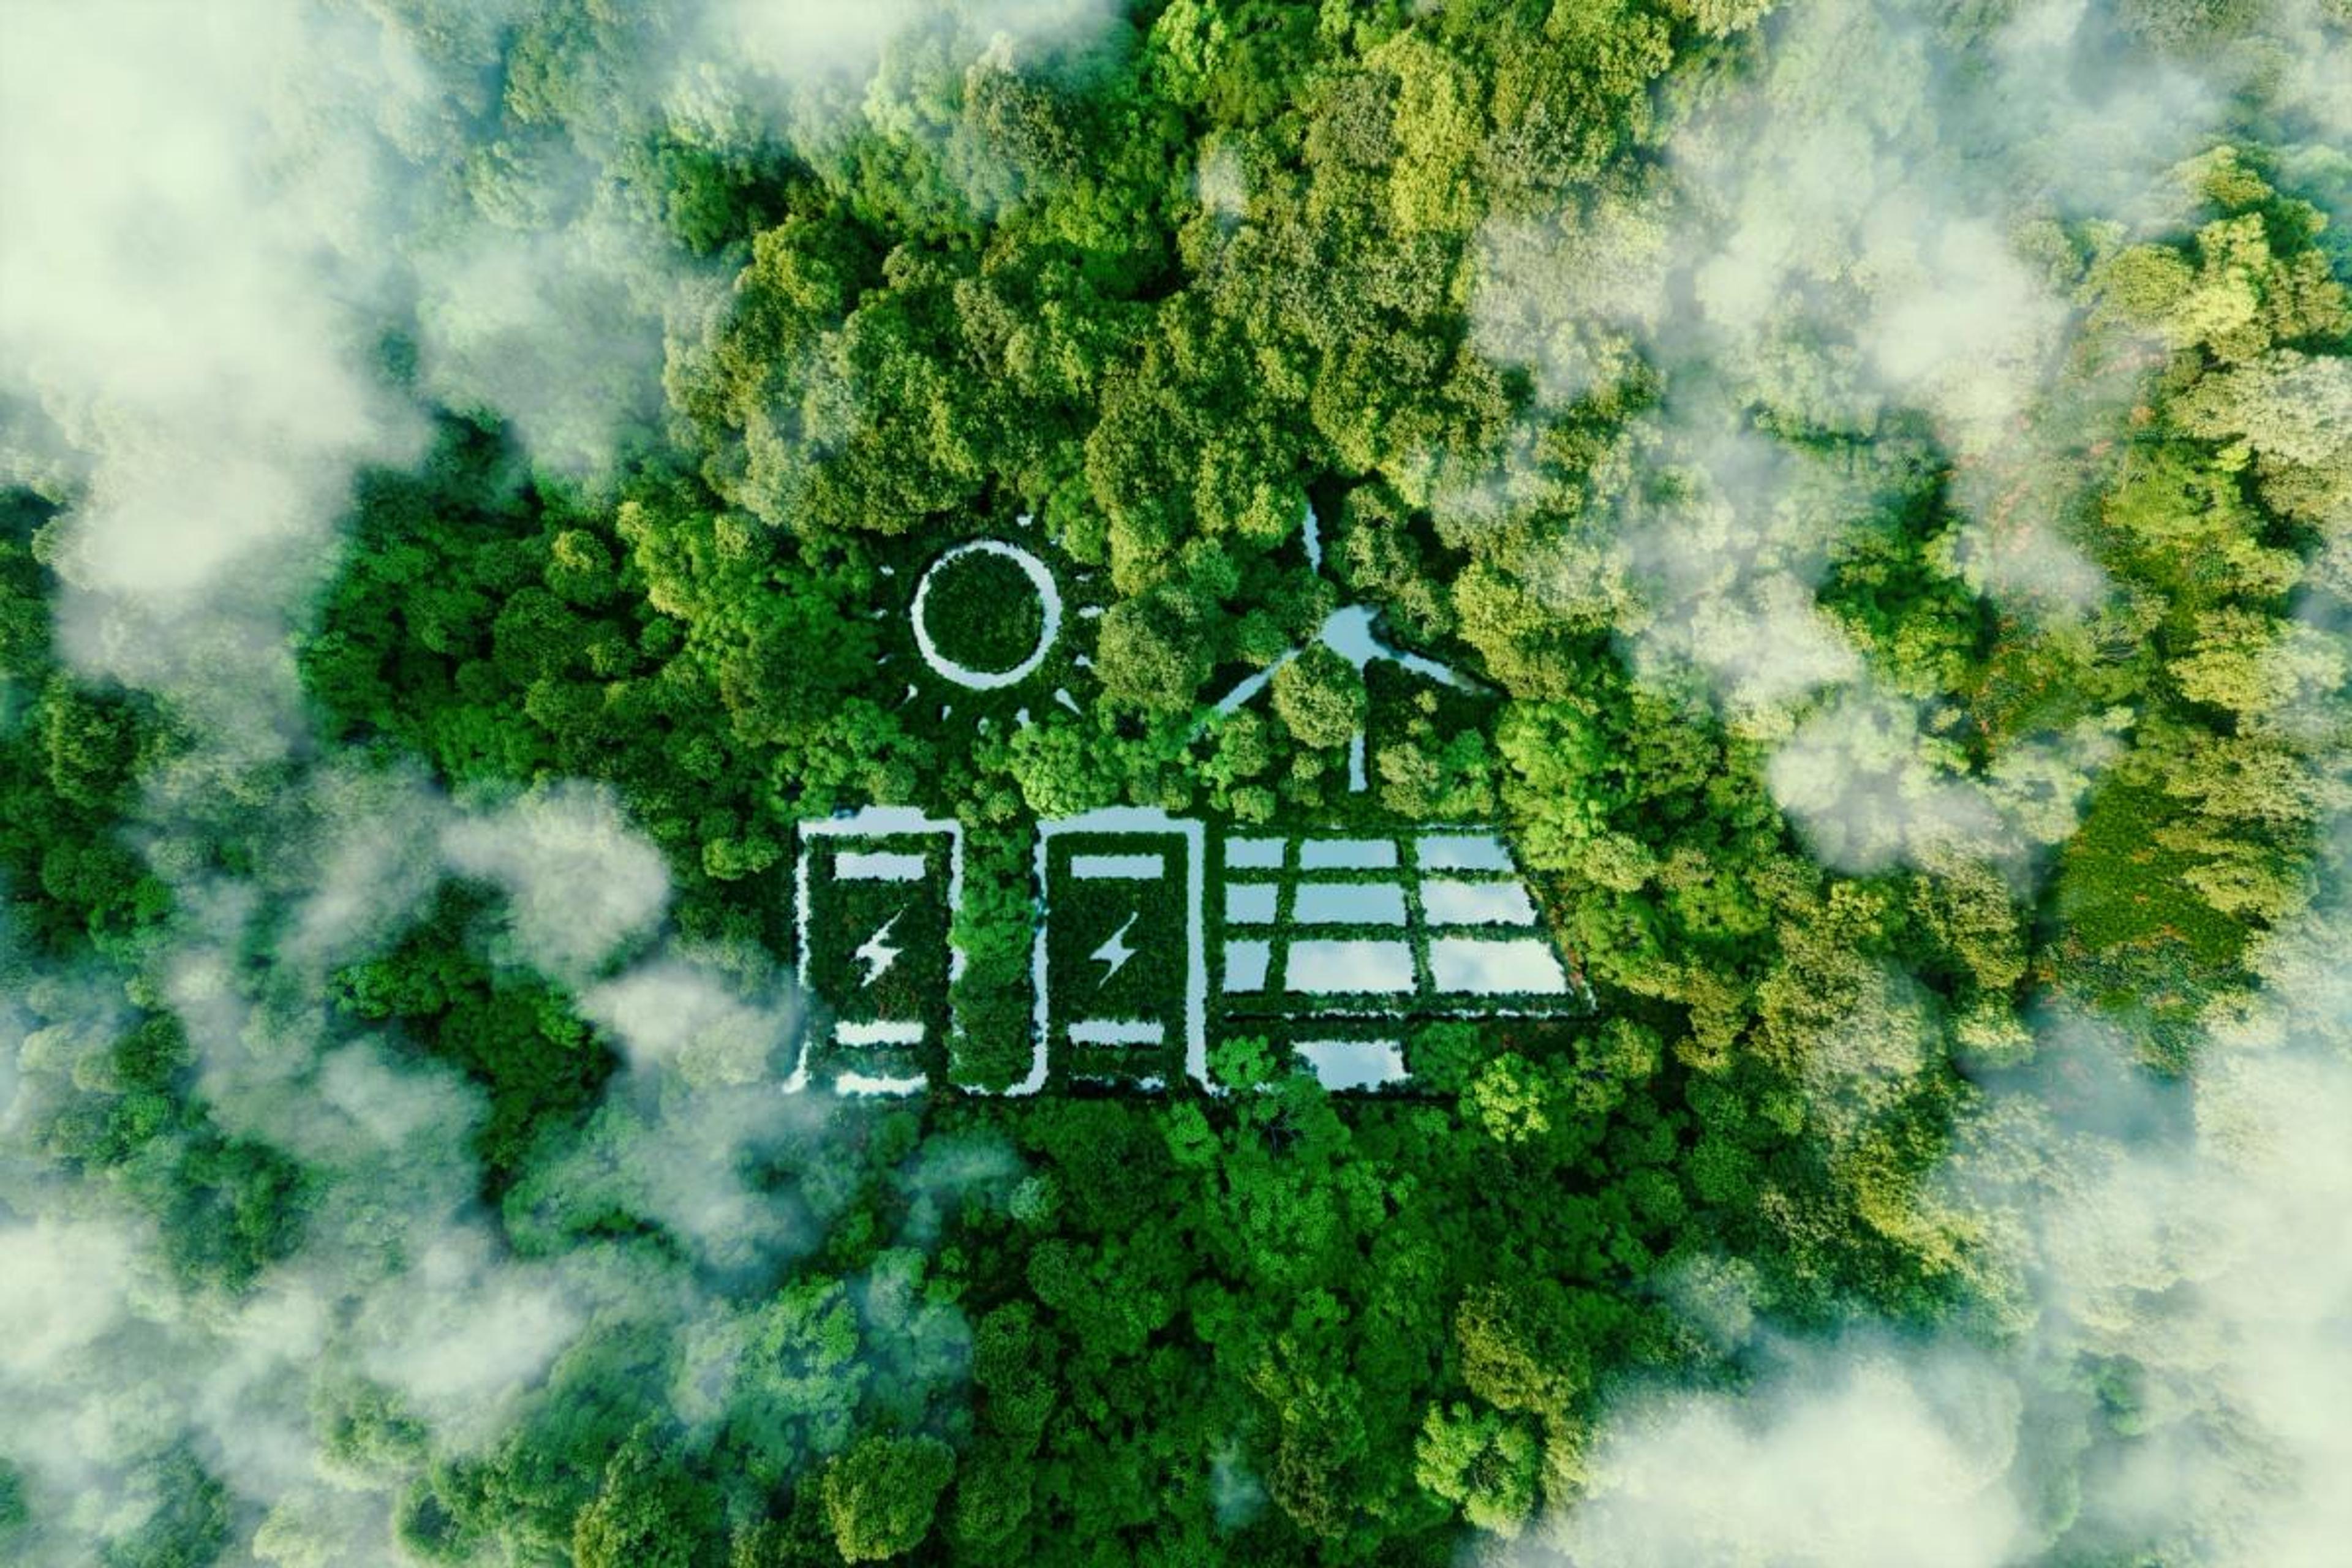 A Lake In The Shape Of A Solar Wind And Energy Storage System In The Middle Of A Lush Forest As A Metaphor For The Concept Of Clean And Organic Renewable Energy 3d Rendering Stock Photo - Download Image Now - iStock